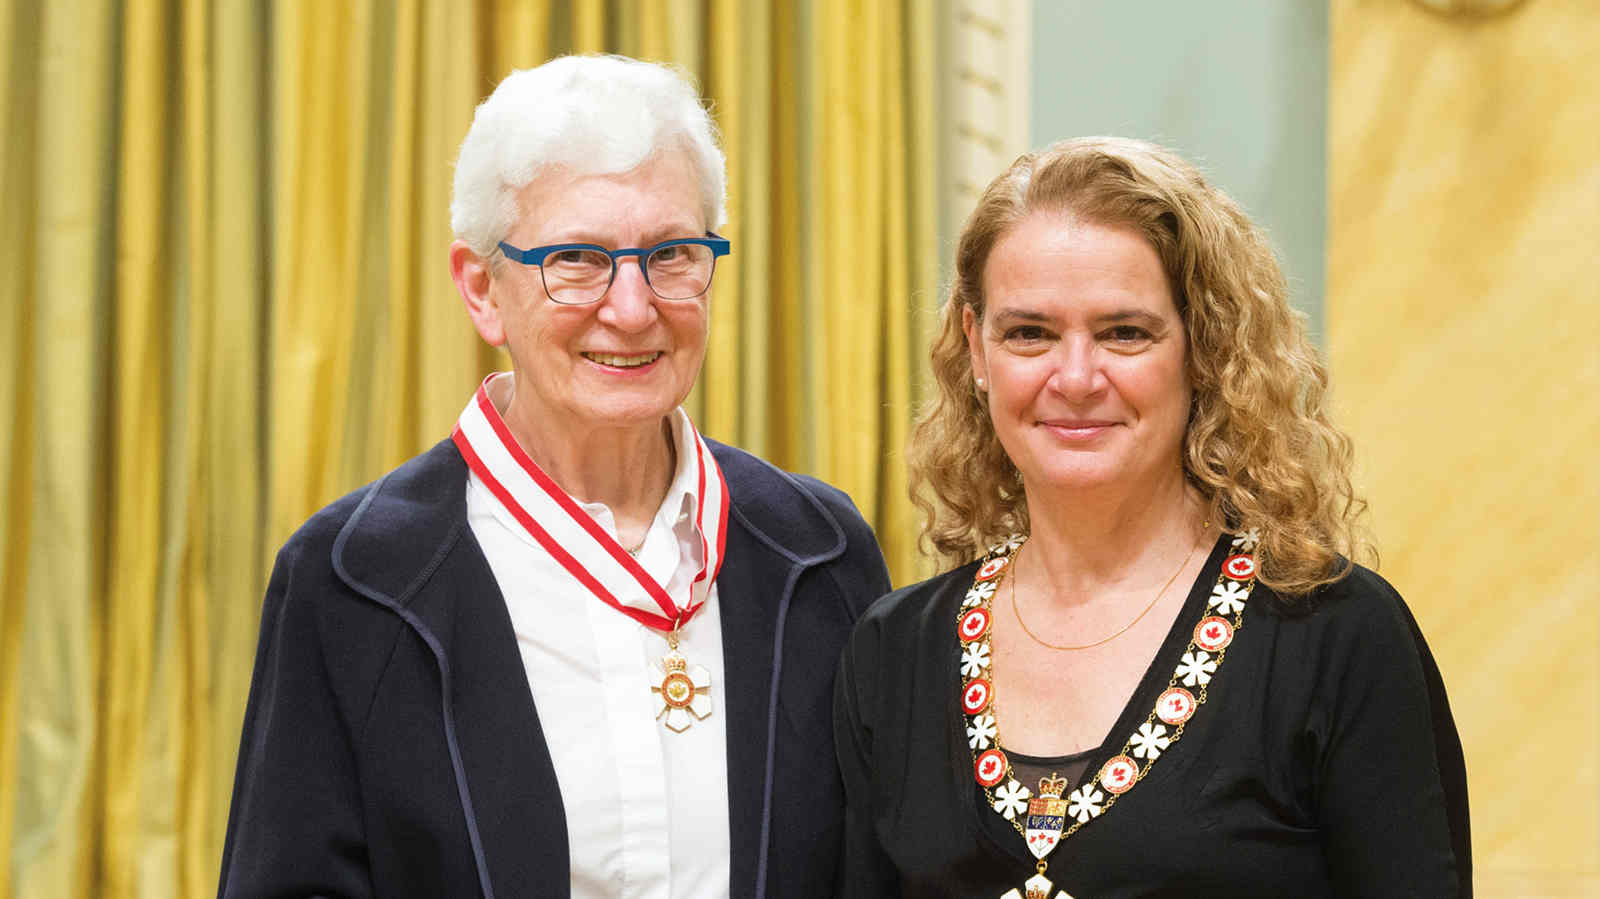 Her Excellency presents the Officer insignia of the Order of Canada to Darleen Bogart, O.C.  Credit: Sgt Johanie Maheu, Rideau Hall, OSGG.